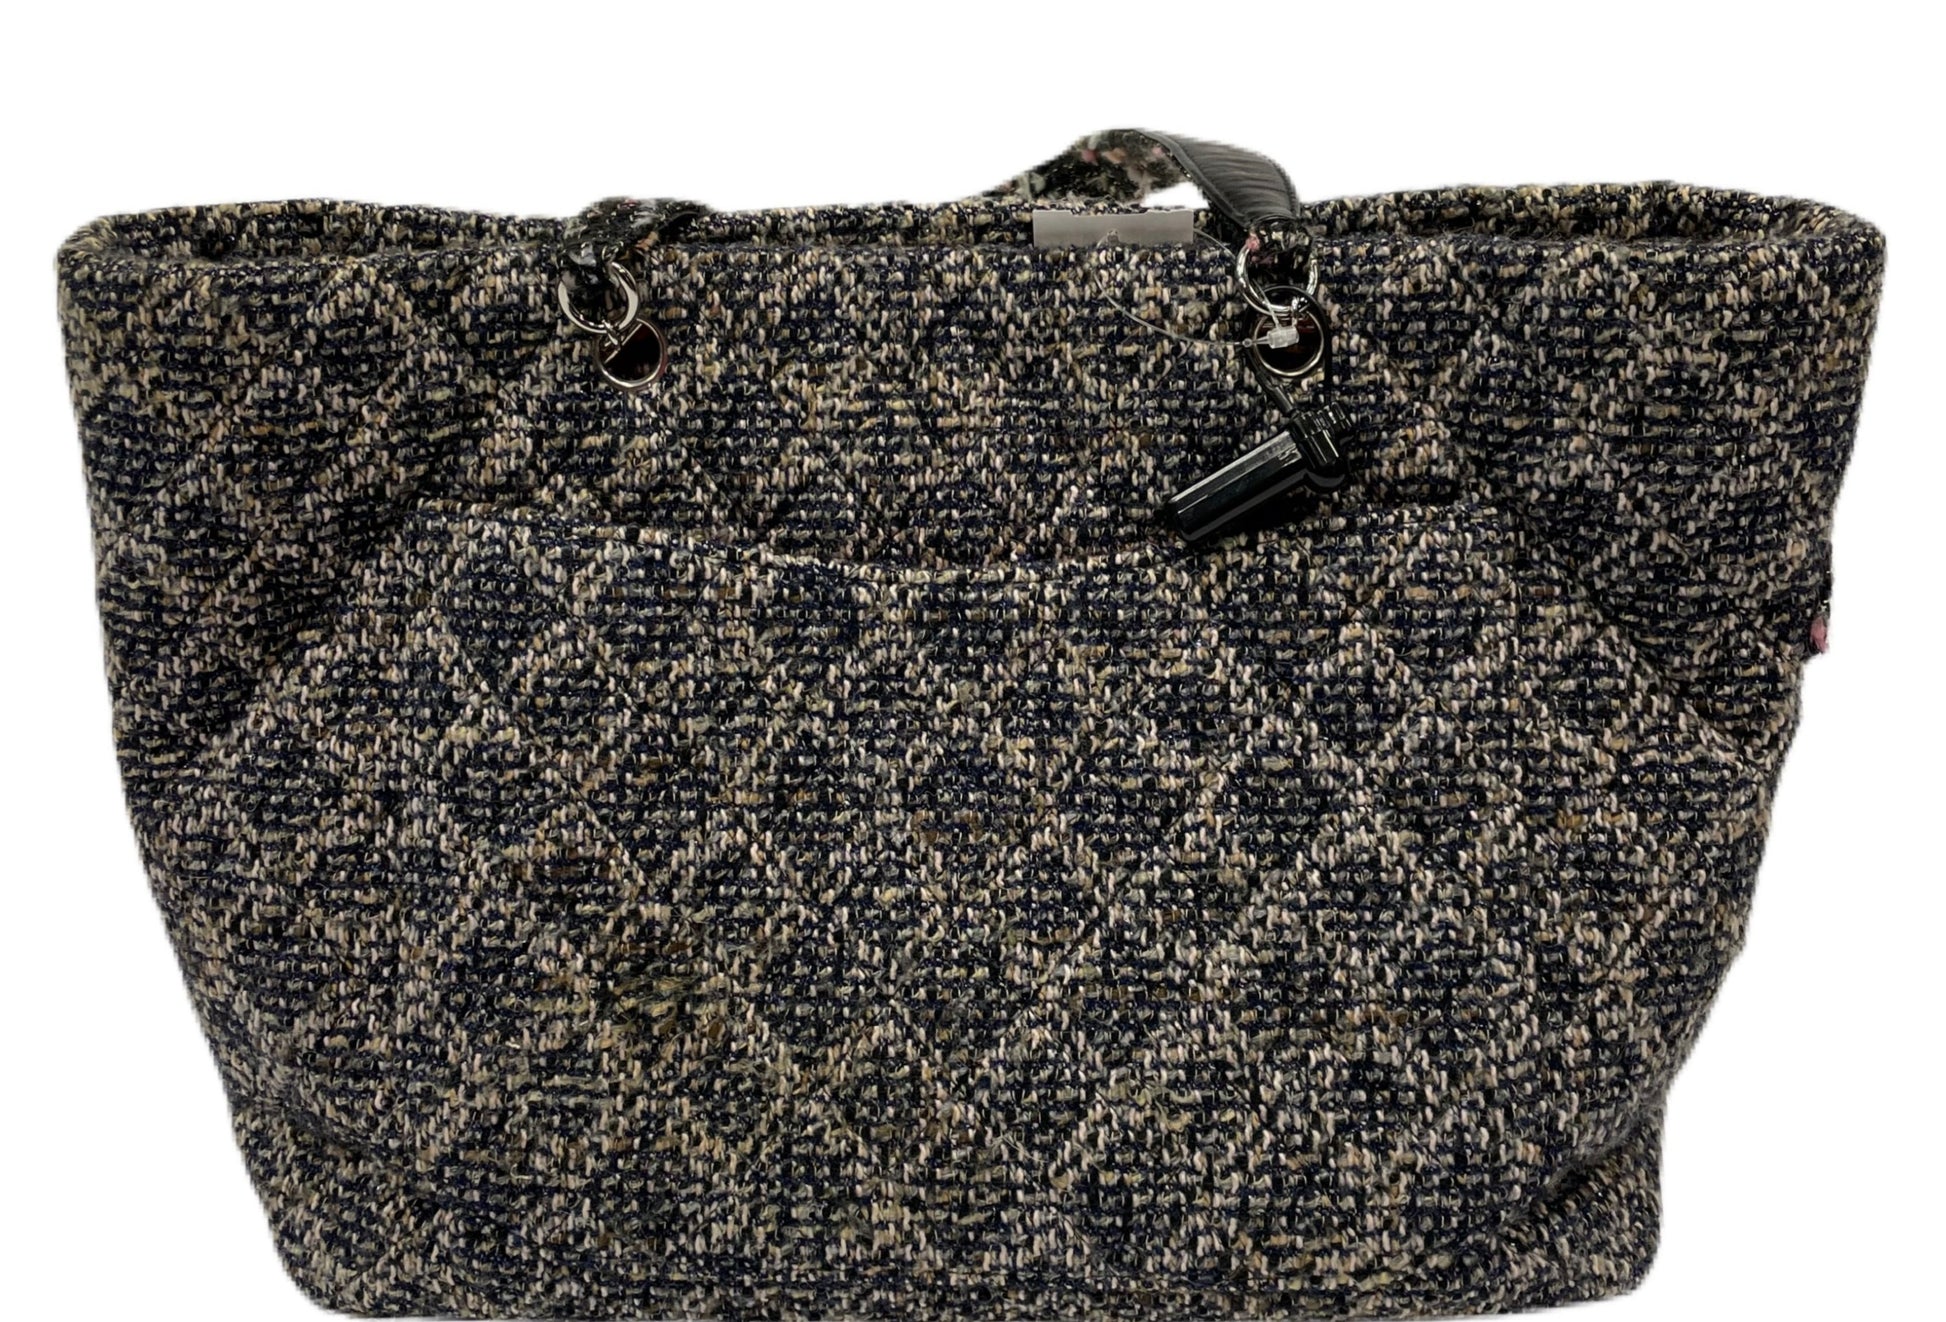 Sold at Auction: Chanel Tan Tweed Tote Bag